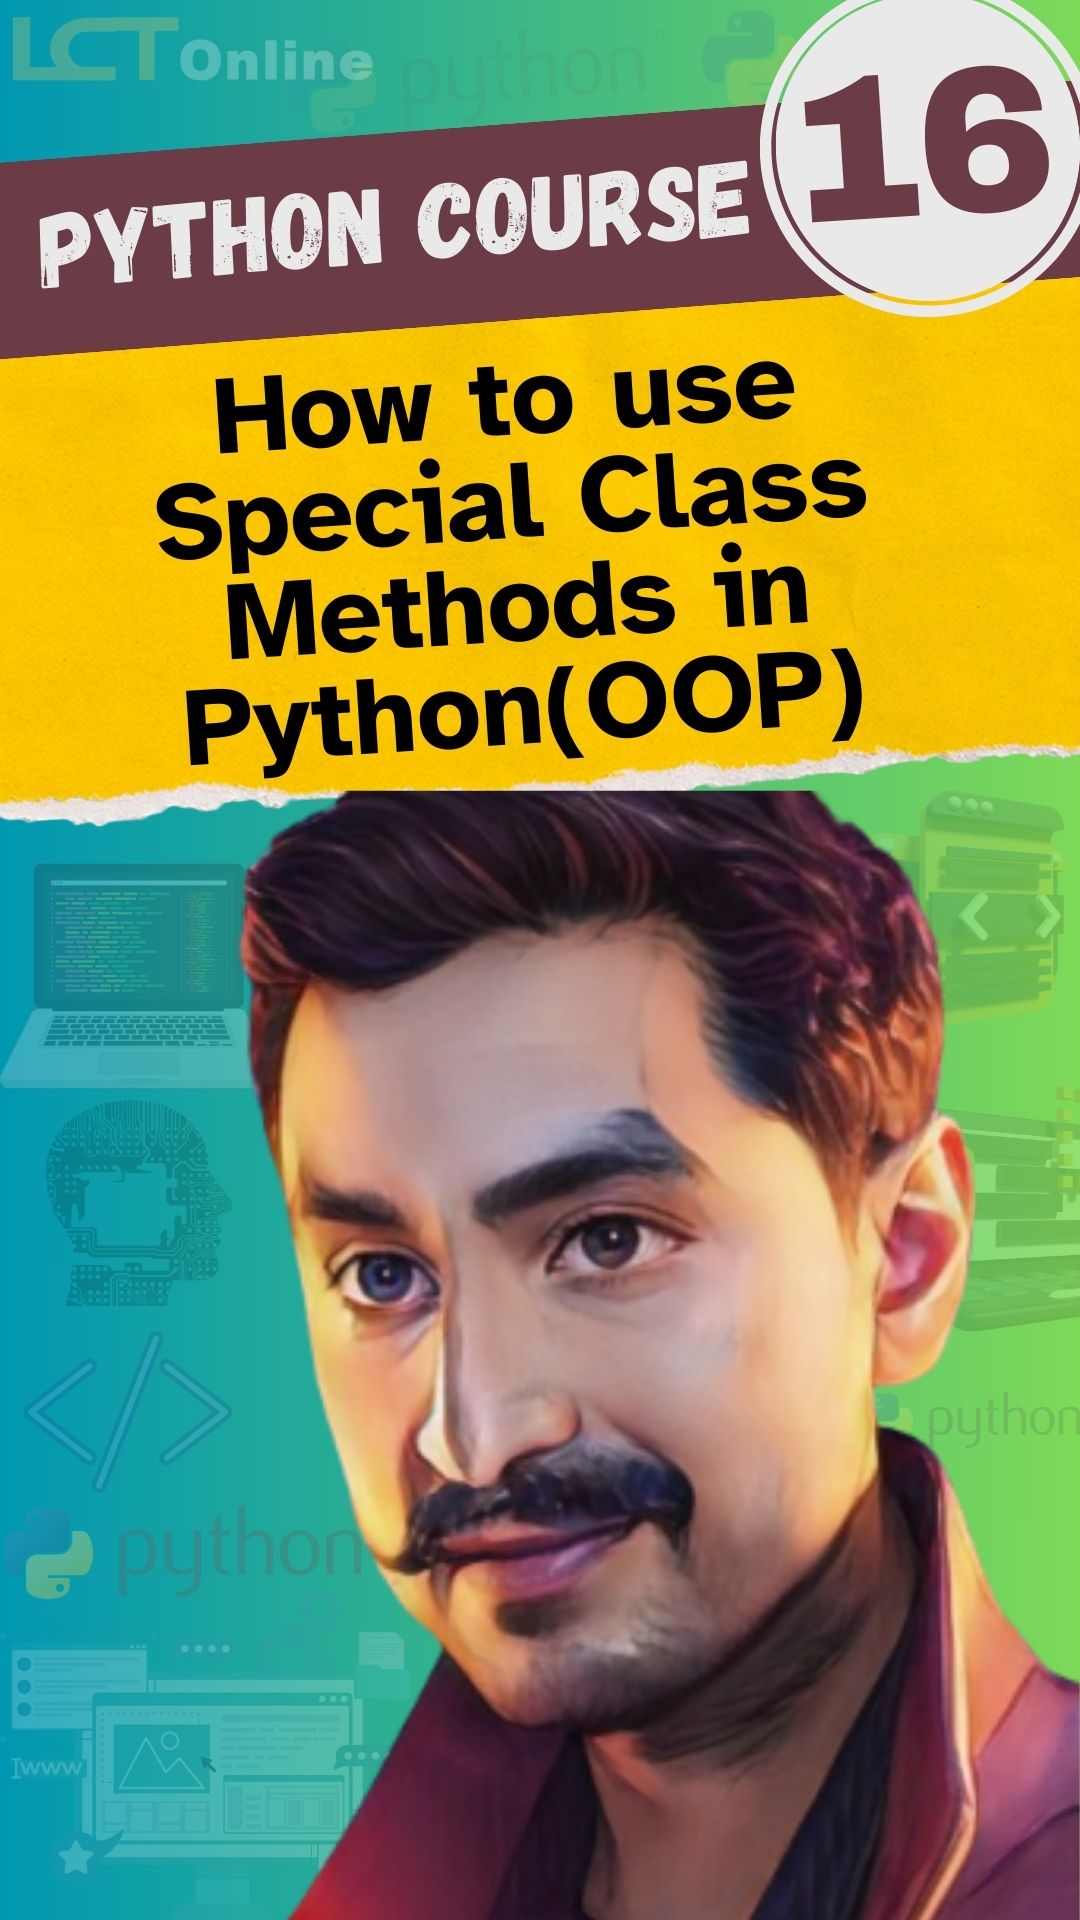 How to use Special Class Methods in Python(OOP)